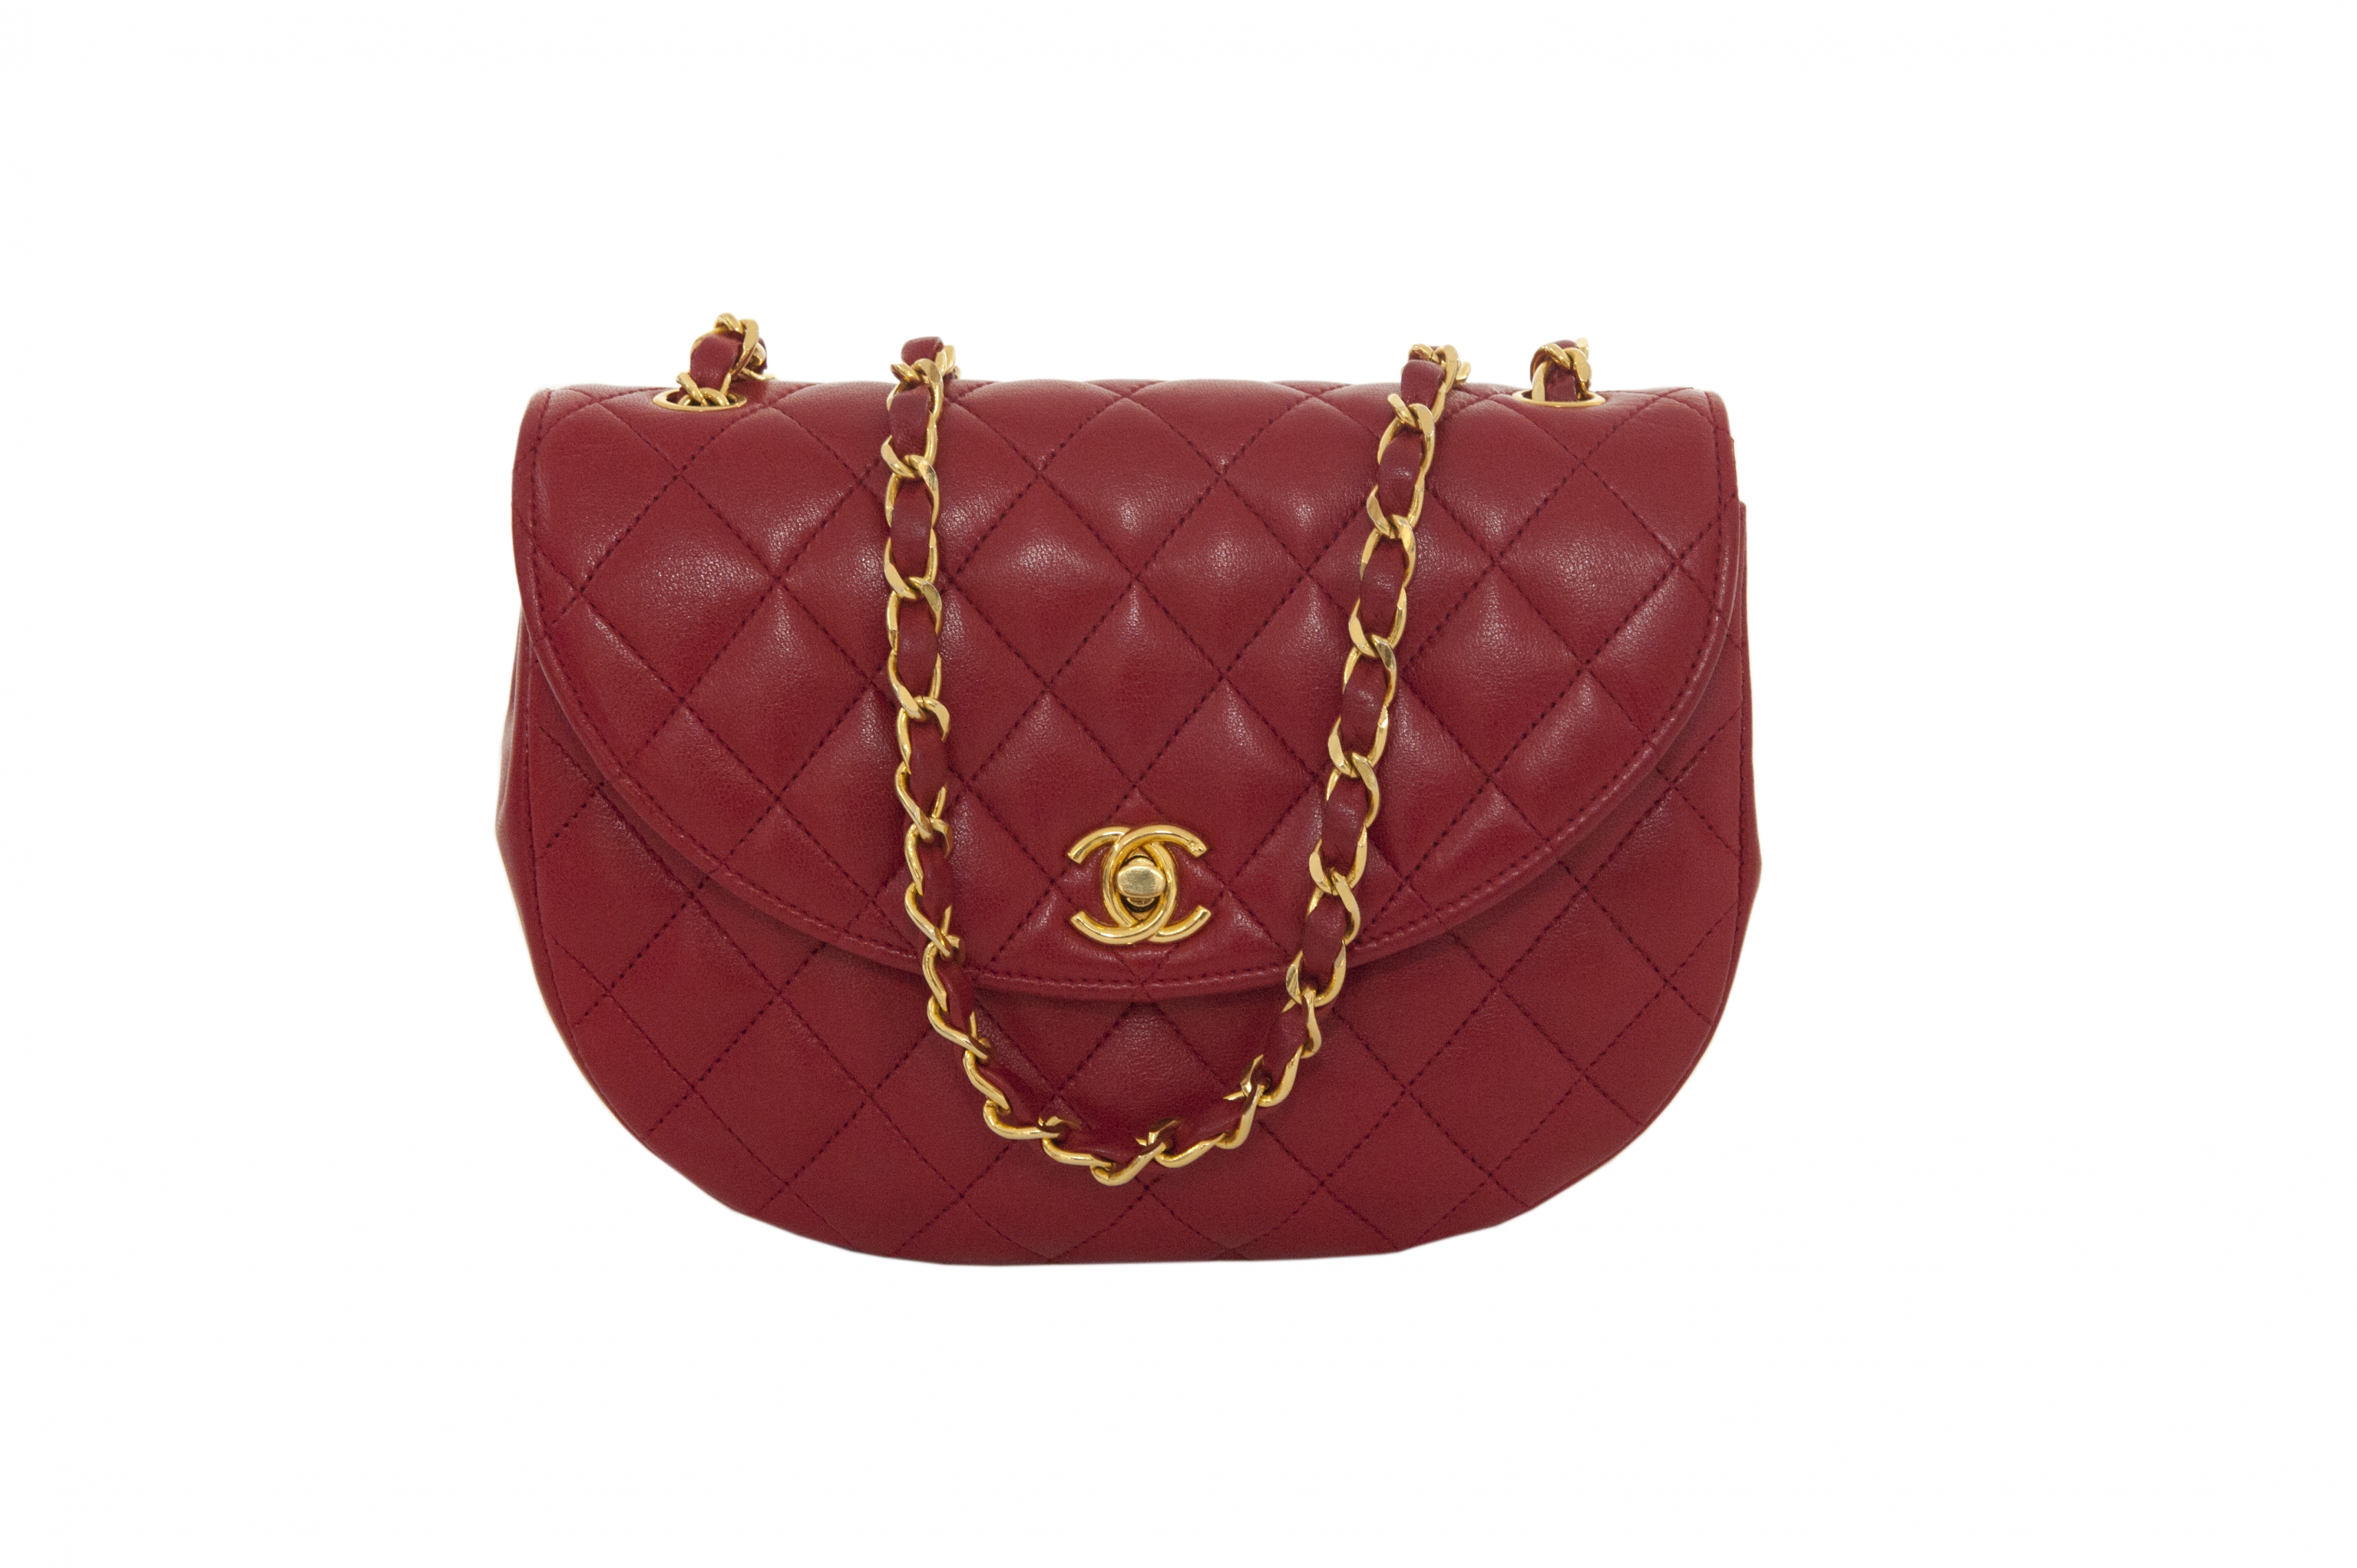 Chanel timeless red quilted leather